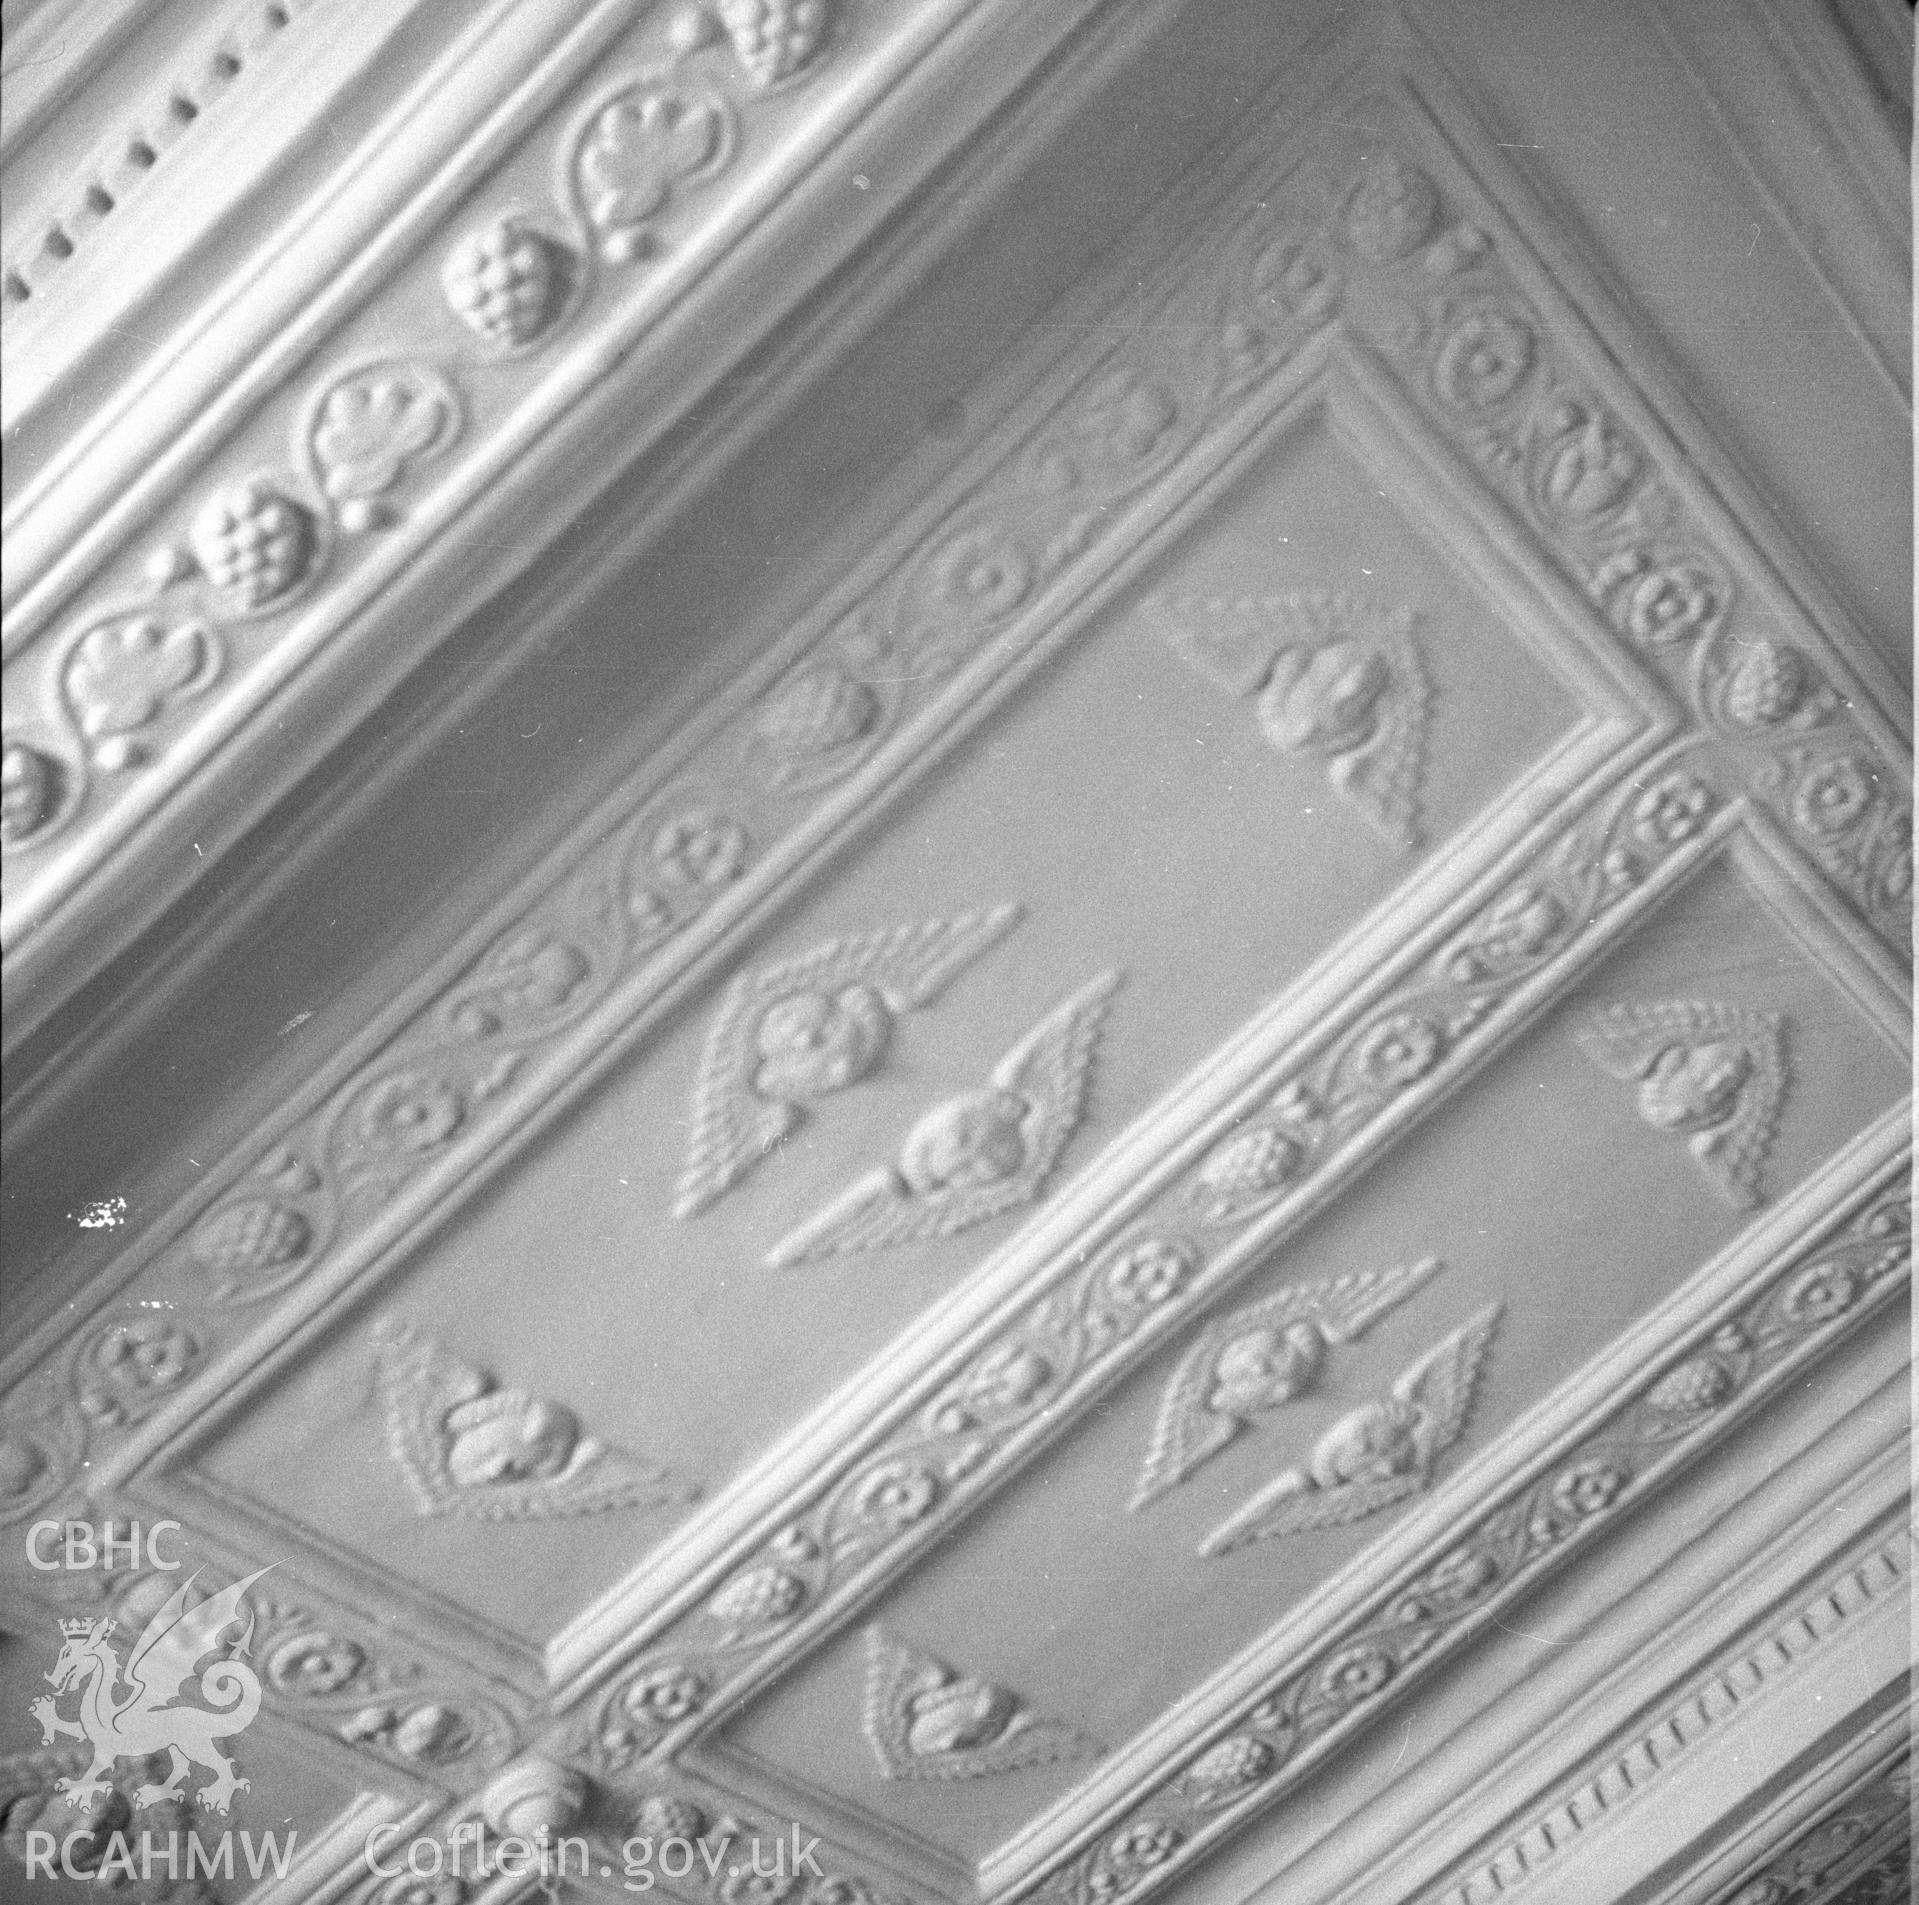 Digital copy of an undated nitrate negative showing ceiling detail at 40 Cross Street, Abergavenny.